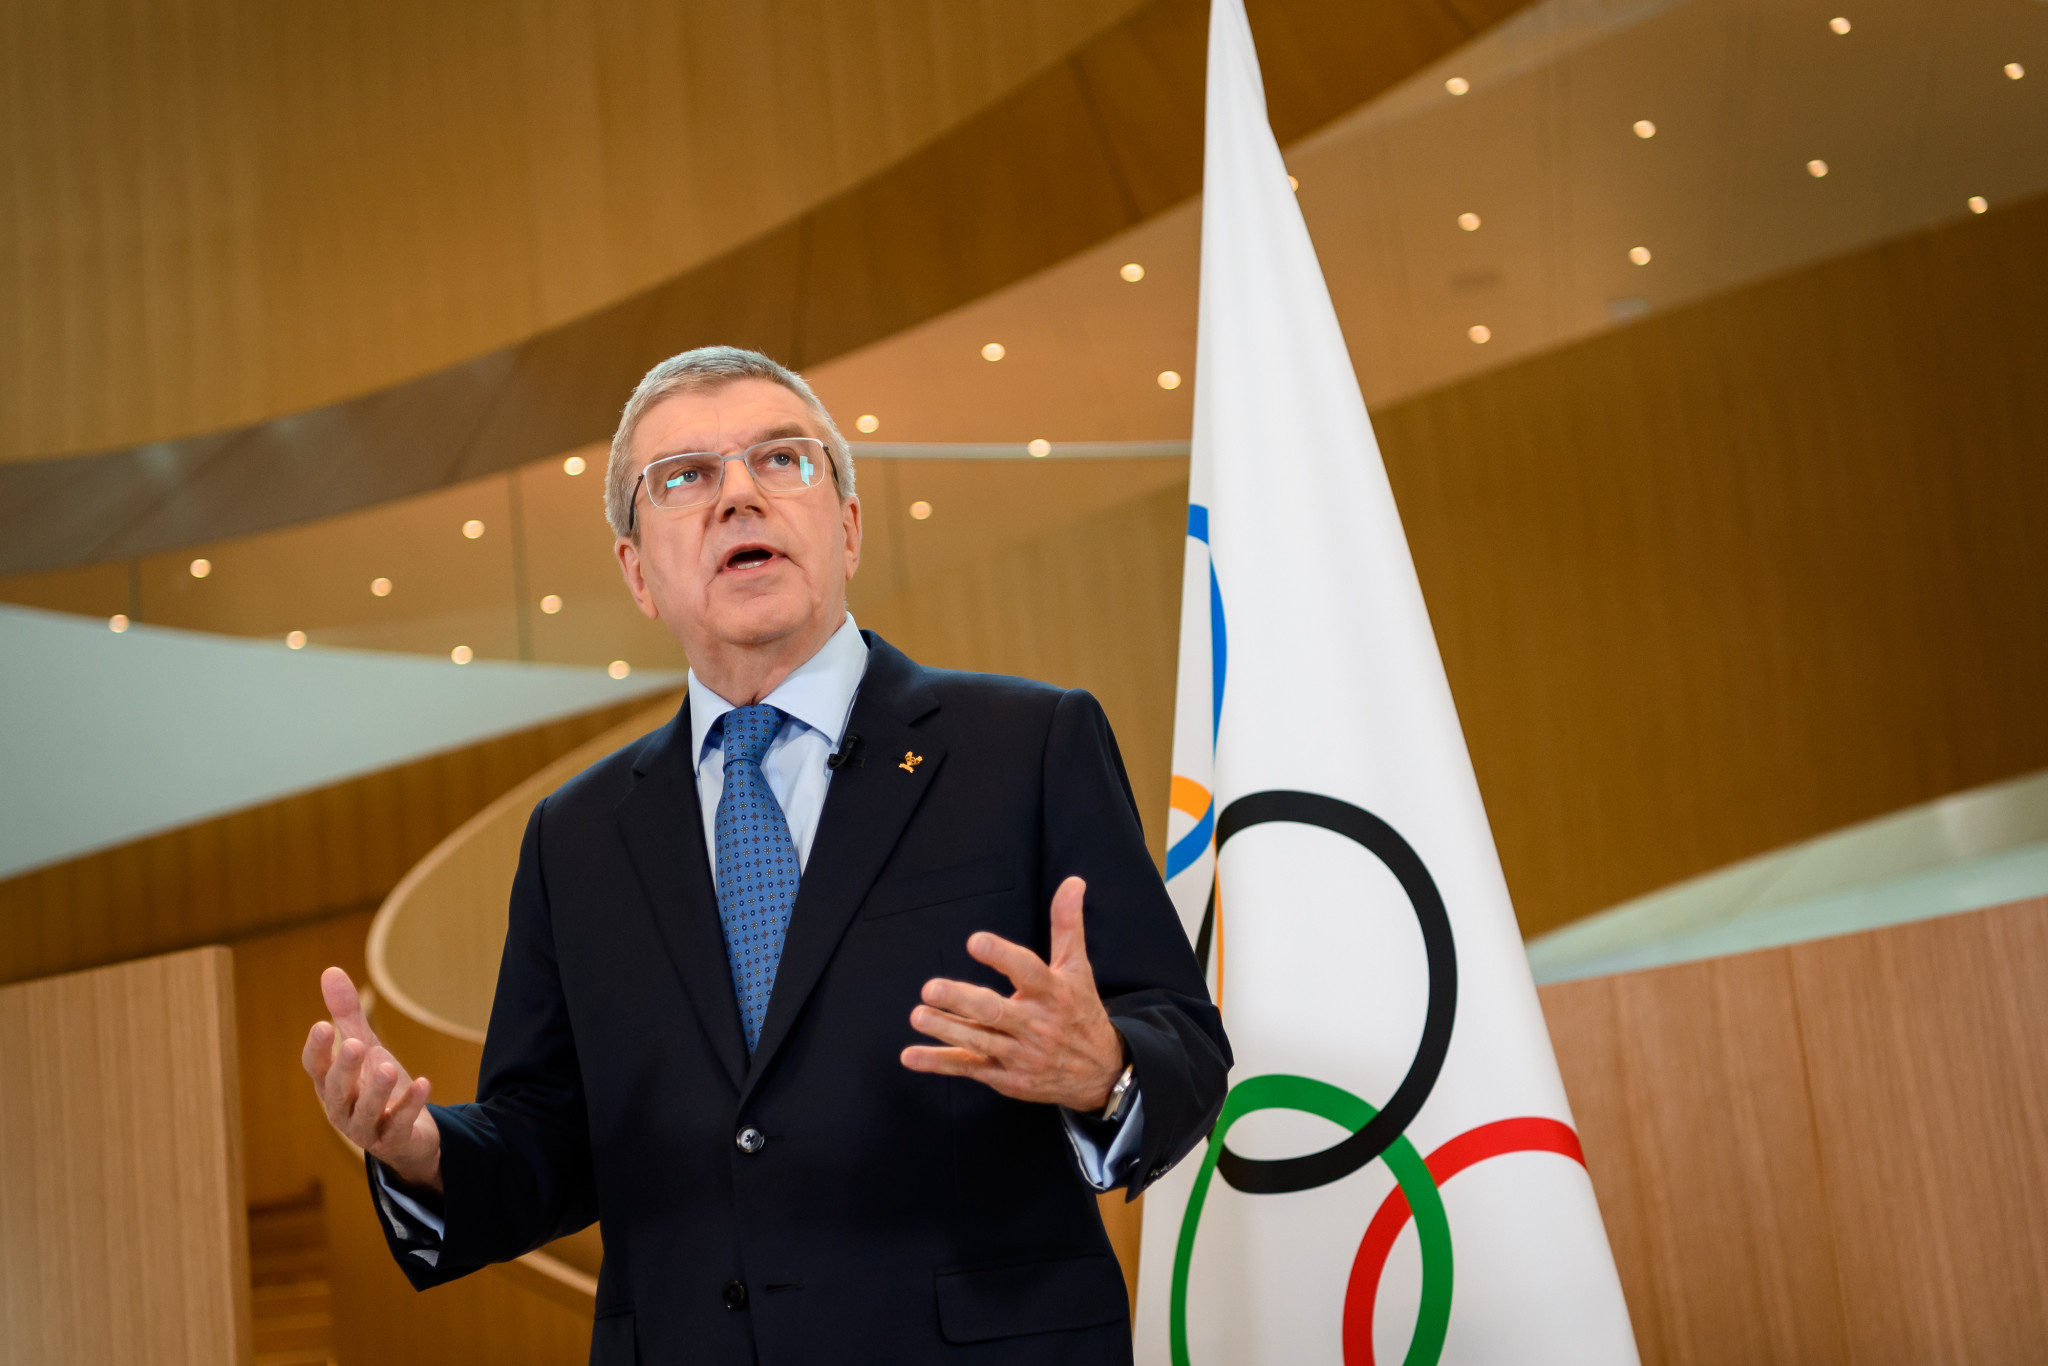 Bach voices IOC's "great concerns" over changes to weightlifting anti-doping rules